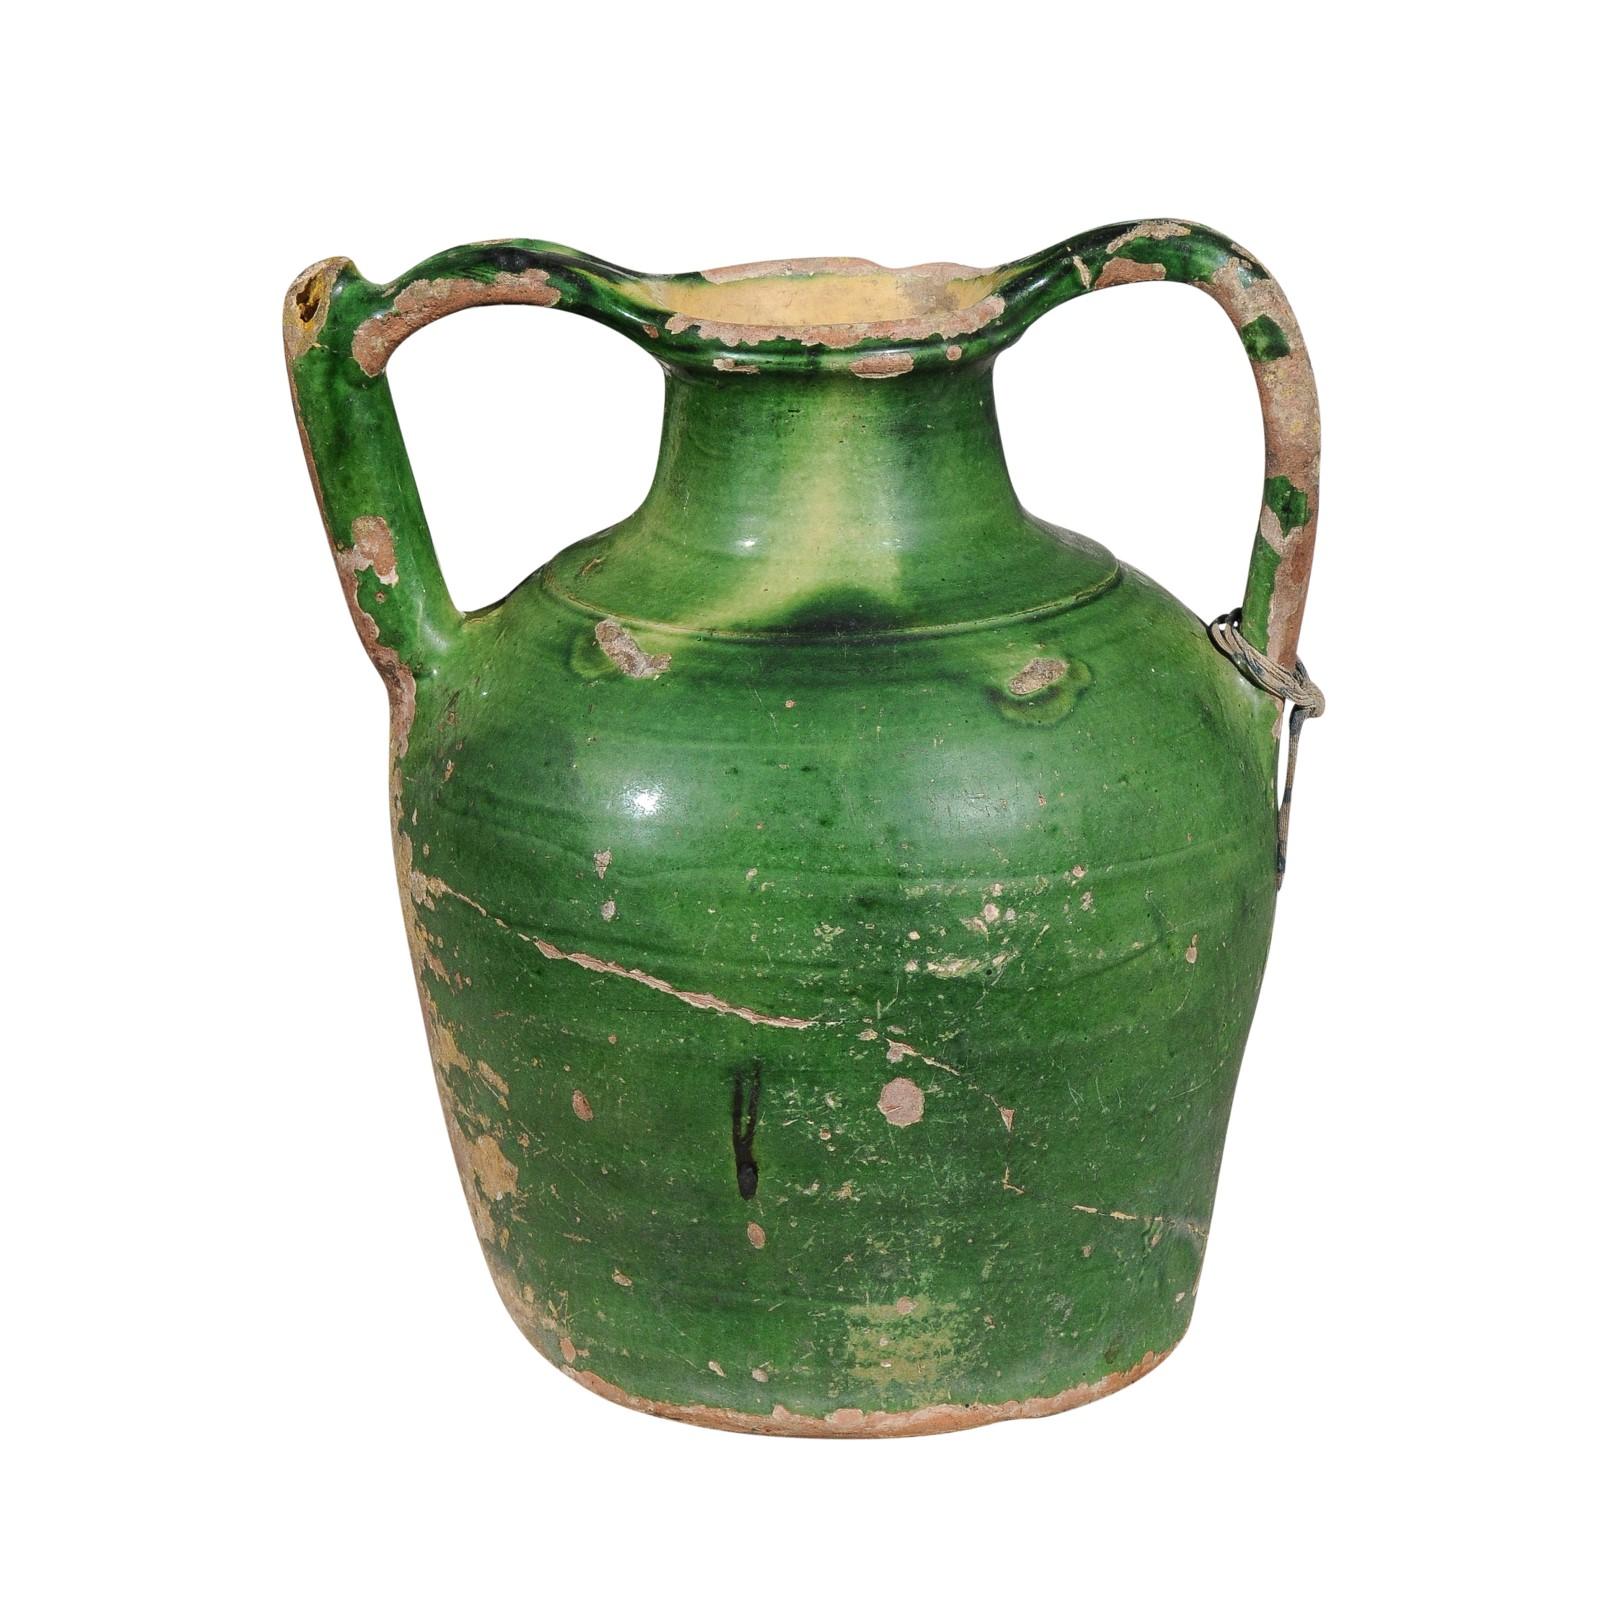 French Provincial Green Glazed Olive Oil Two-Handled Jug Pottery, circa 1850